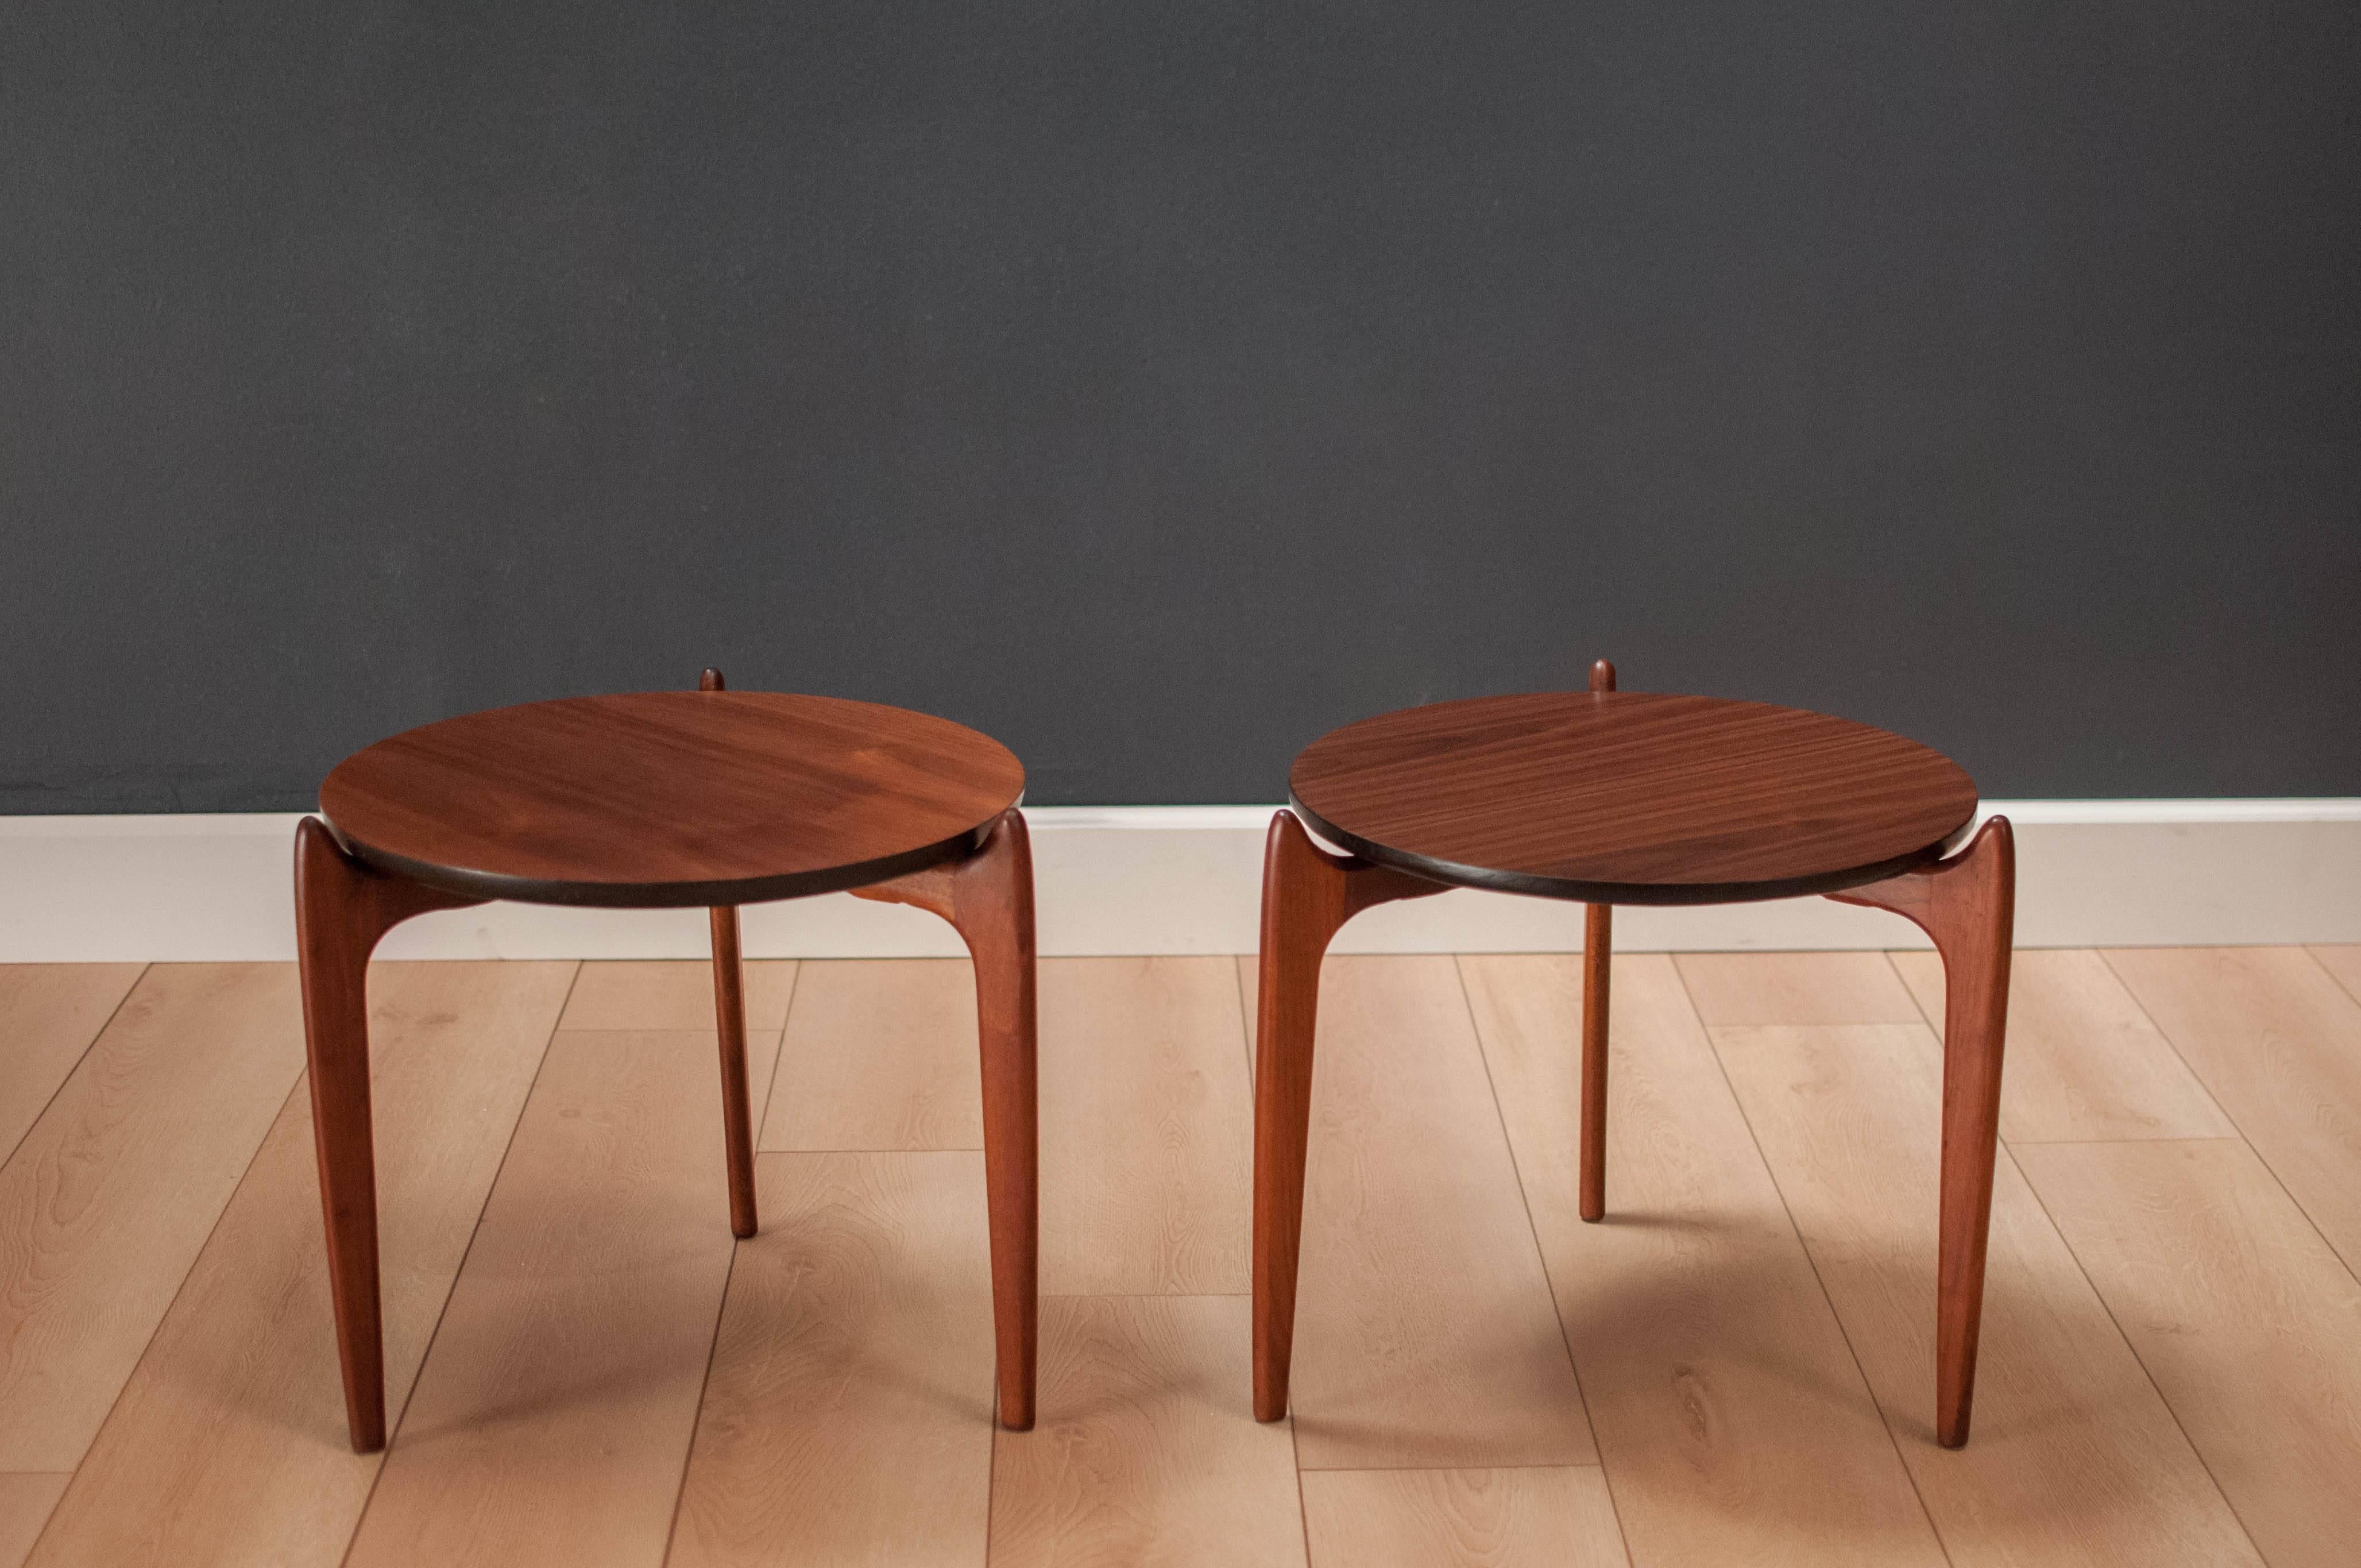 Mid-Century walnut side tables designed by Adrian Pearsall for Craft Associates. This pair features a stunning walnut grain top and sculptural wood legs. Looks great from any angle. Price is for the pair. 

